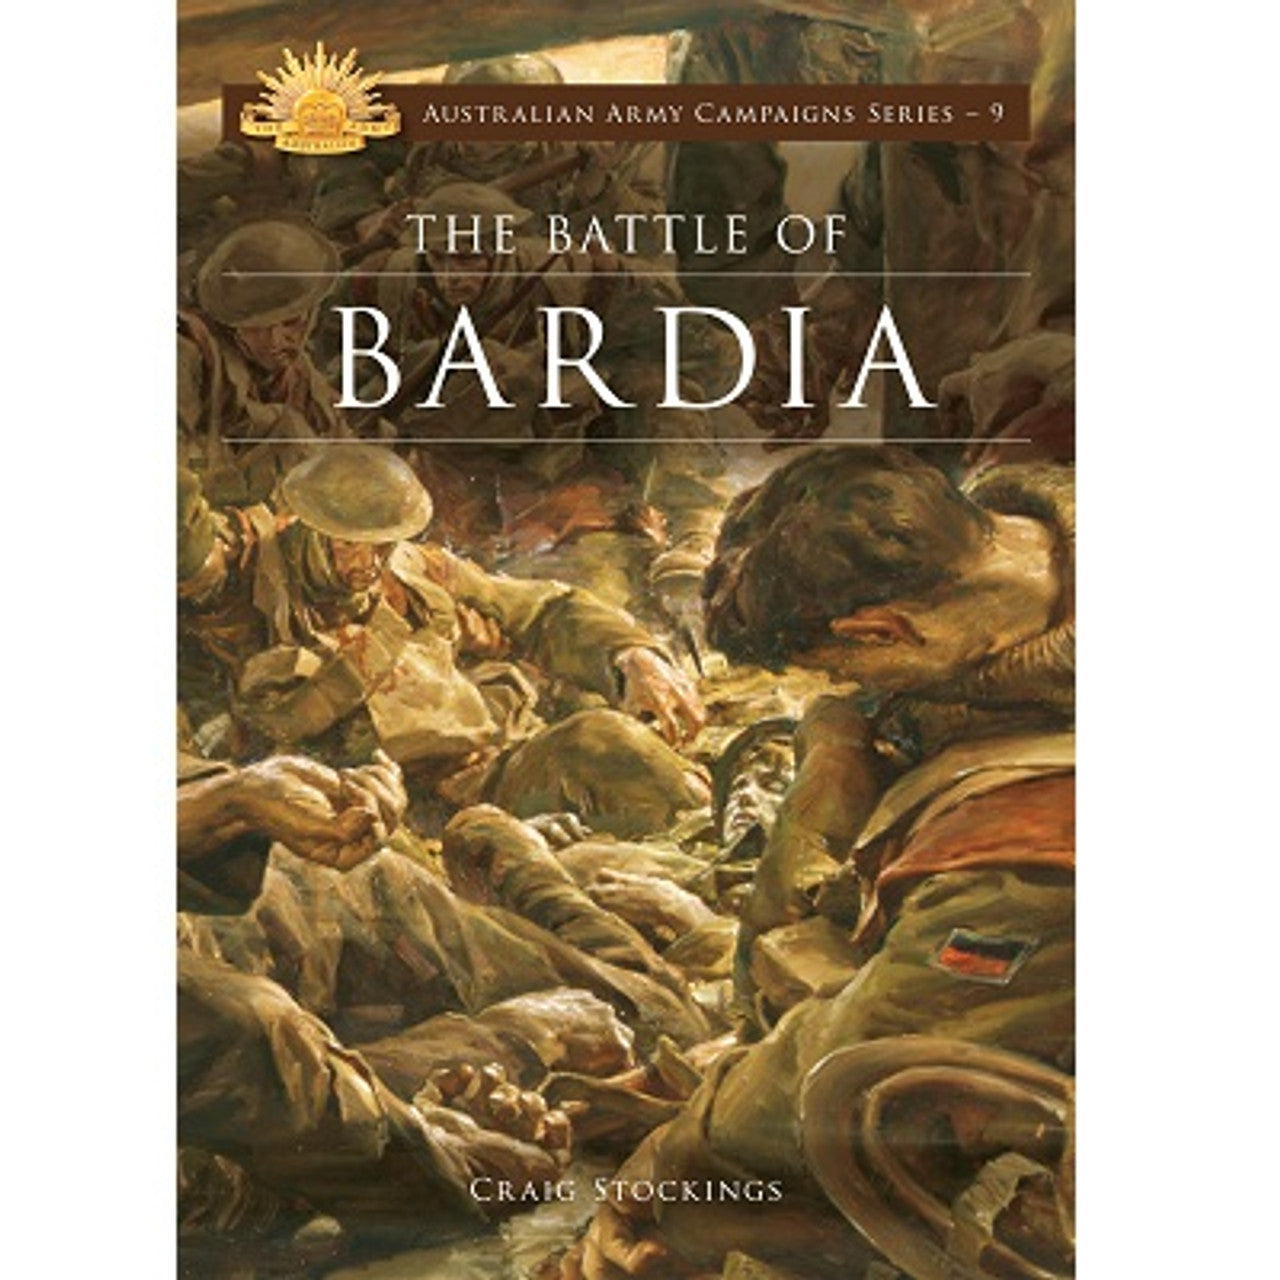 On the dawn of 3 January 1941, Australian 6th Division members initiated a daring strike against the Italian-occupied fortress-town of Bardia in Libya. Their fierce effort was the opening salvo of the Second World War. www.moralepatches.com.au